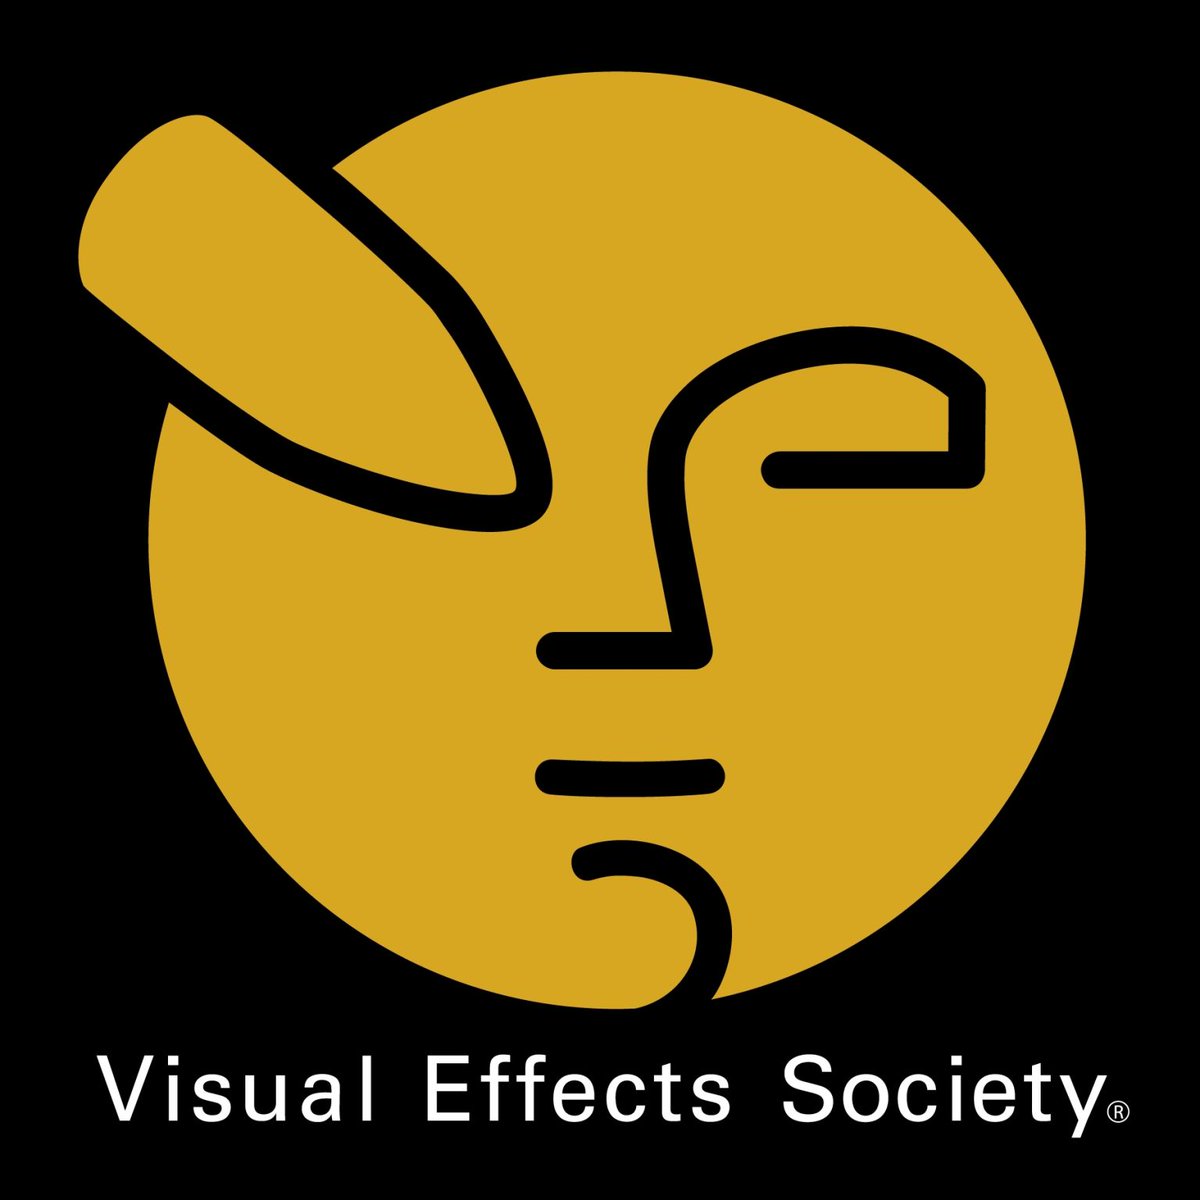 「Honored to be inducted into the Visual E」|Neil Blevinsのイラスト